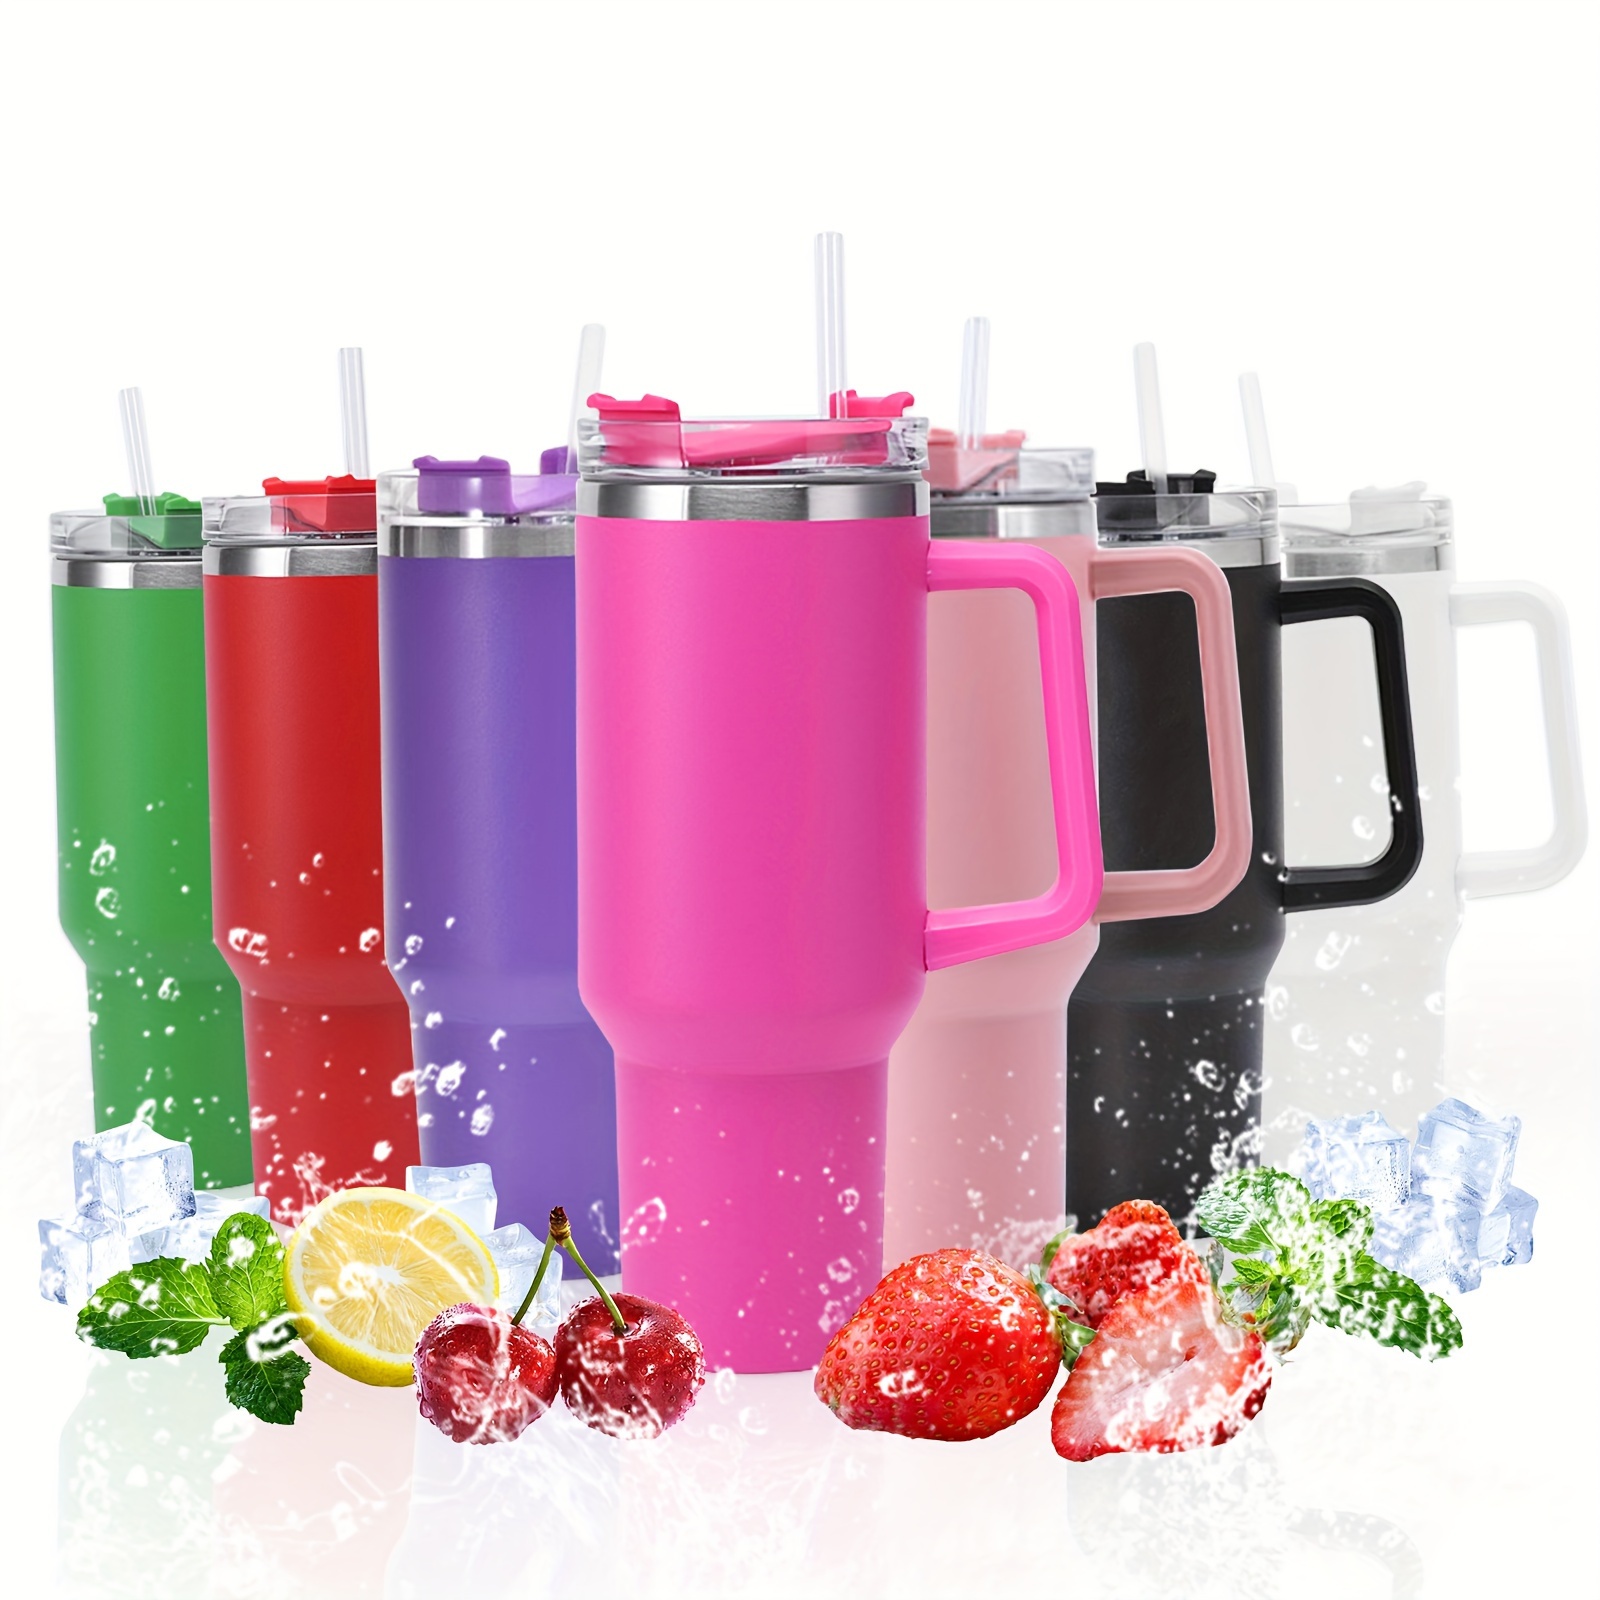 

1pc 40oz/1200ml Double Walled Stainless Steel Vacuum Insulated Tumbler With Handle Straw - Perfect For Travel And On-the-go Coffee And Tea Drinking